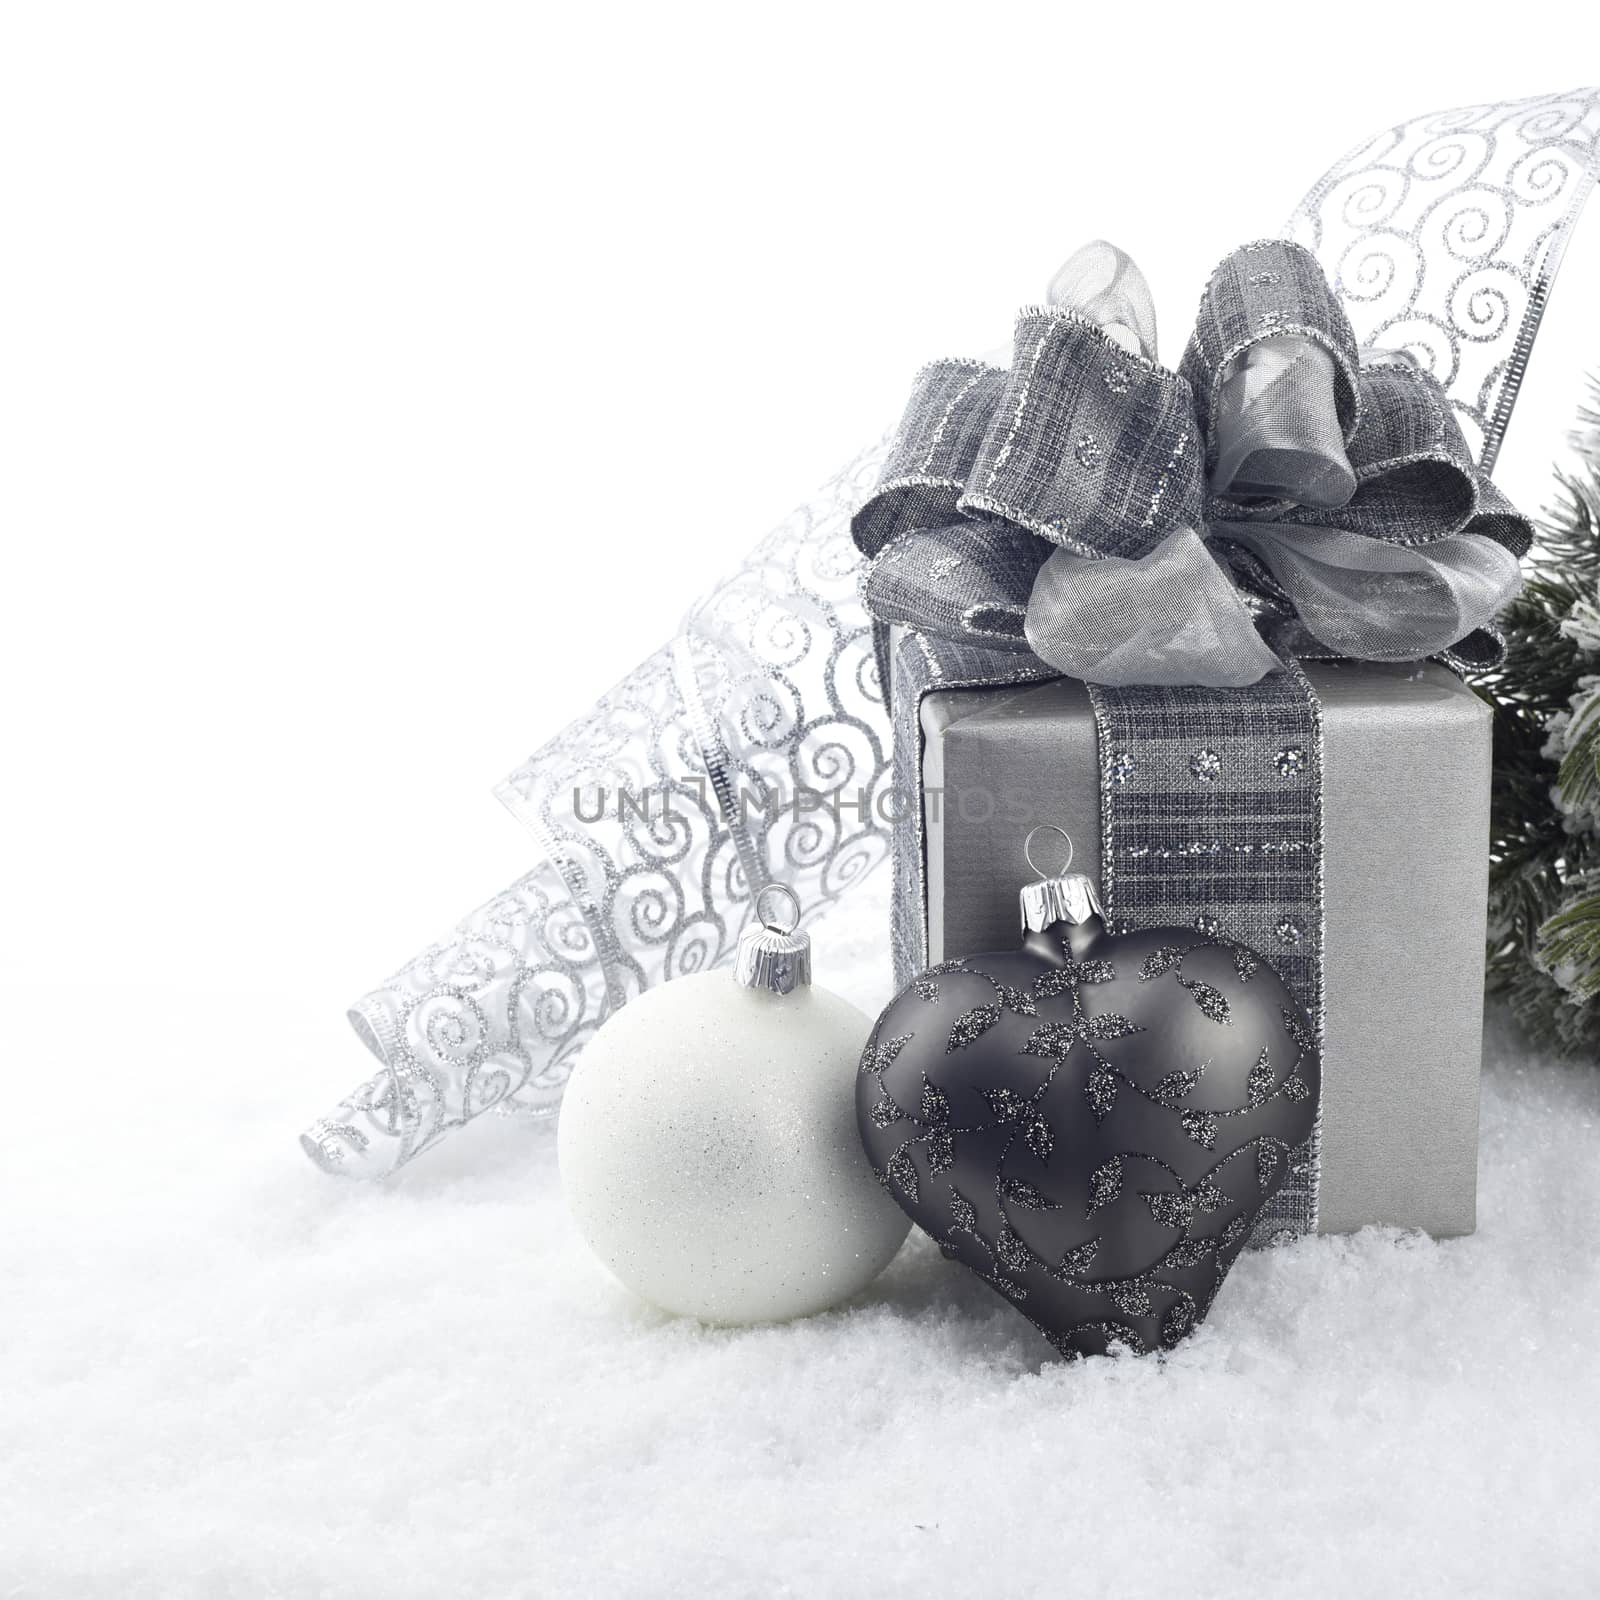 Christmas decoration with ball ornaments and gift box on snow